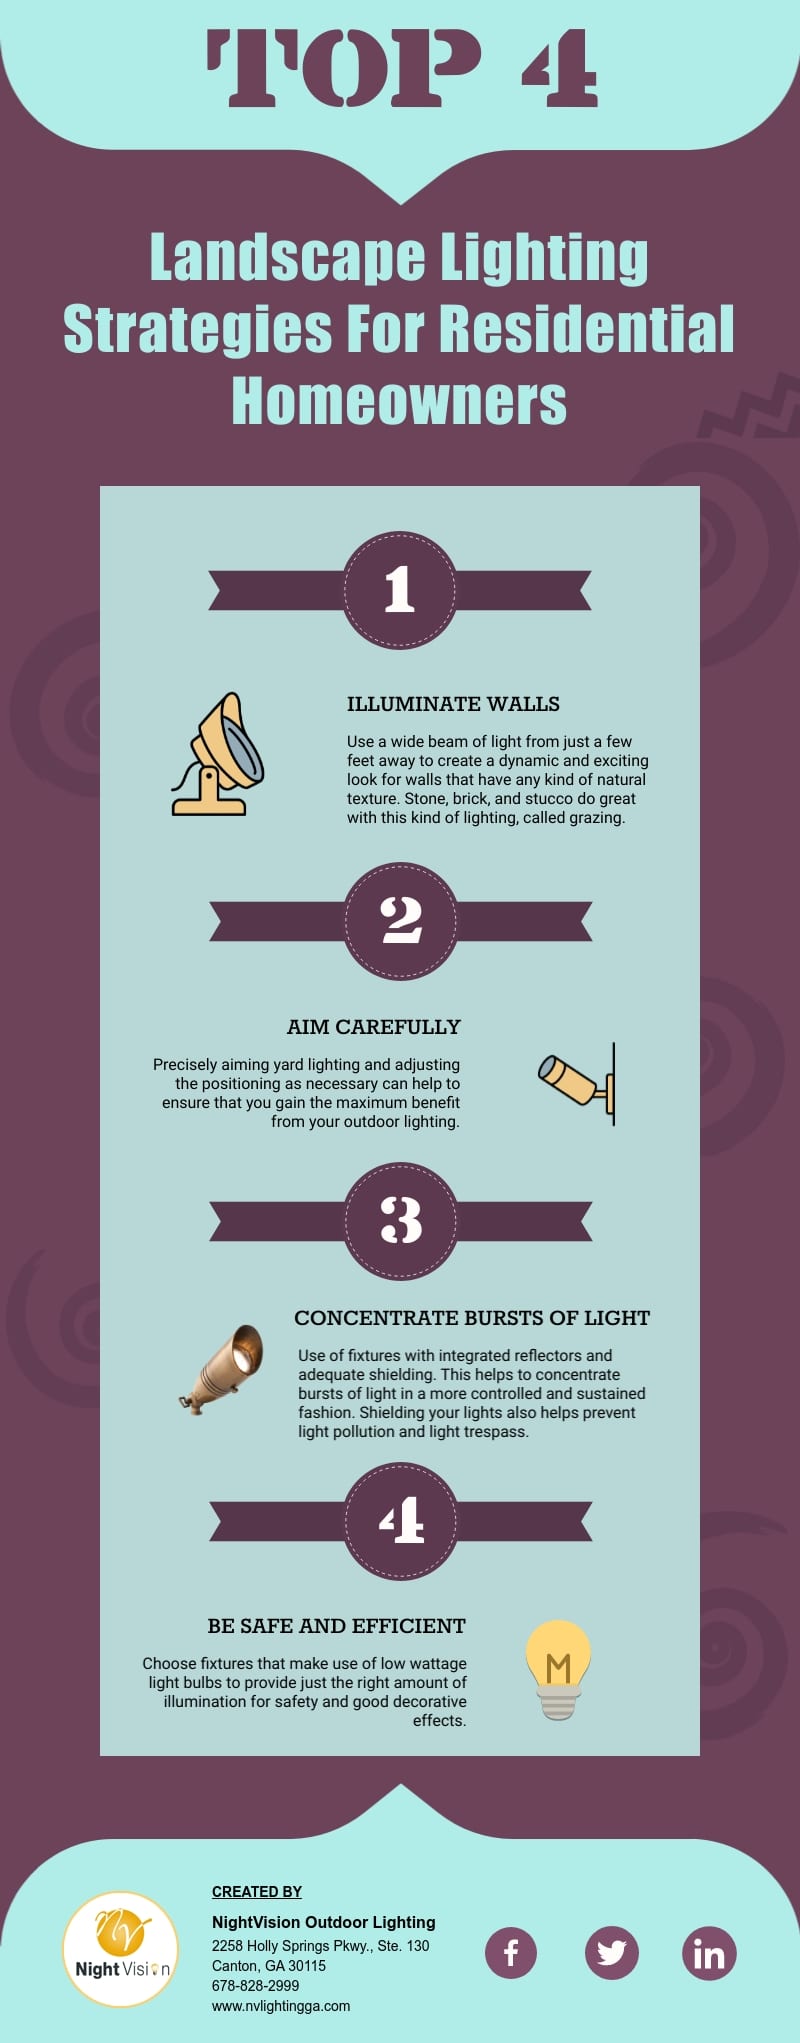 Landscape Lighting Strategies For Residential Homeowners [infographic]